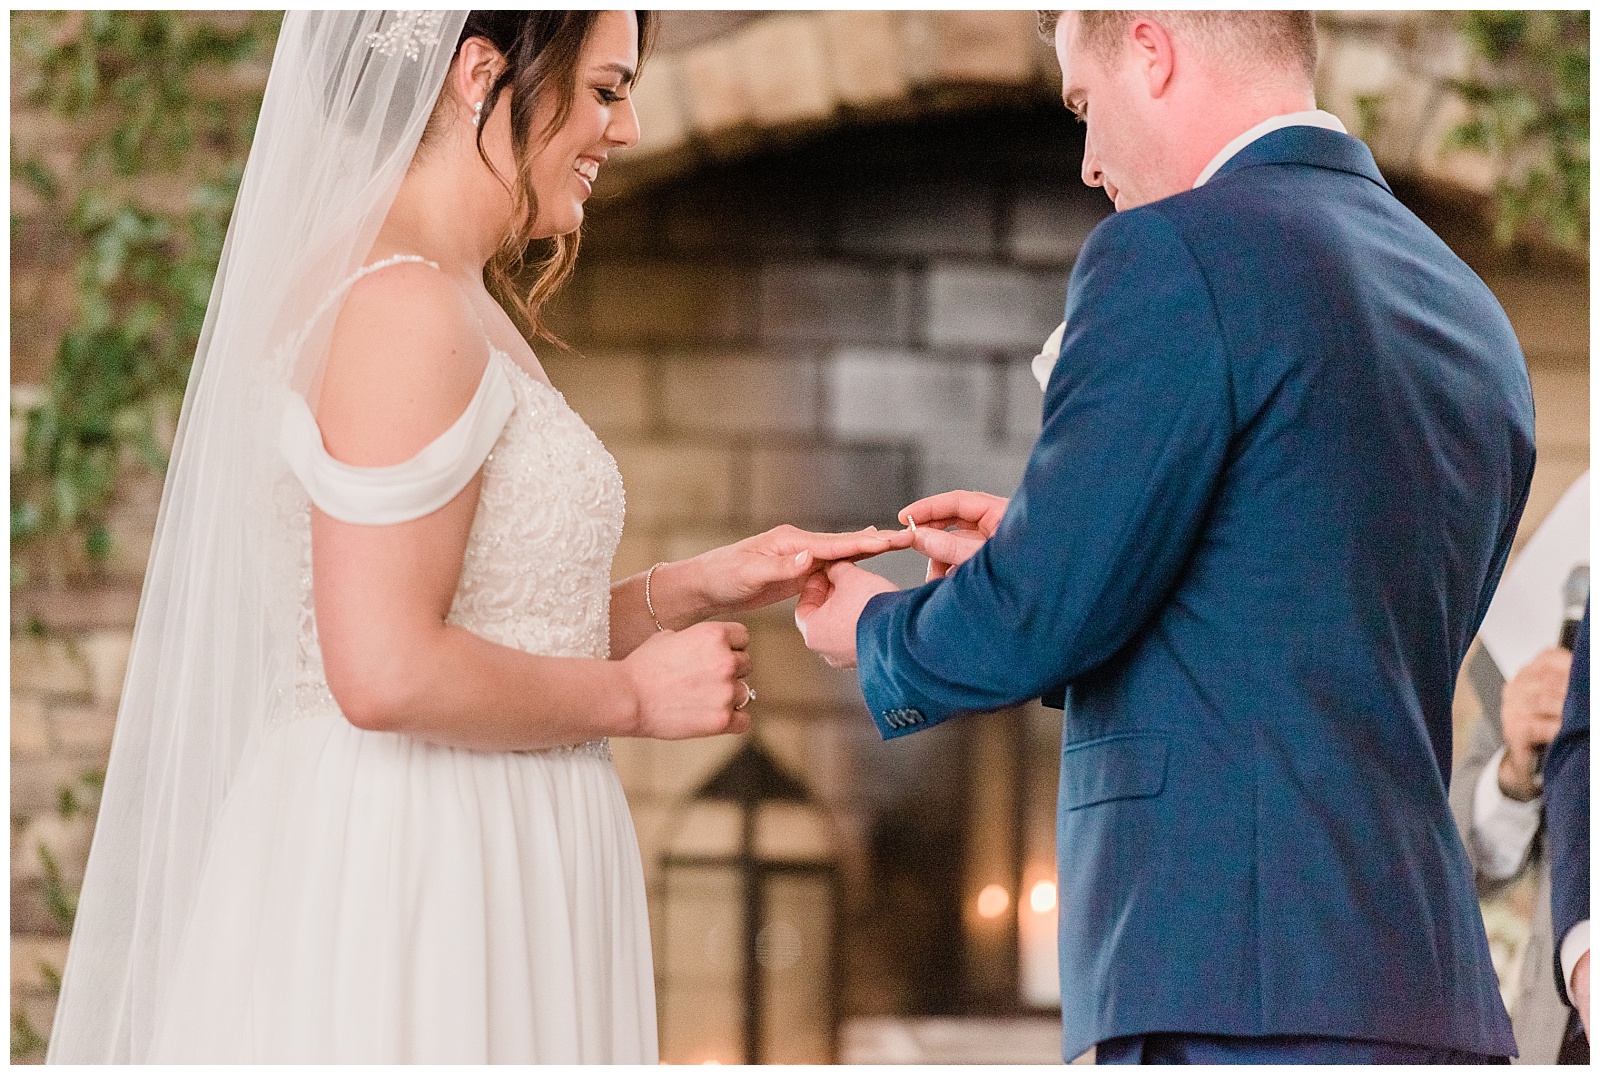 Groom puts a wedding ring on the bride's finger during the ceremony.